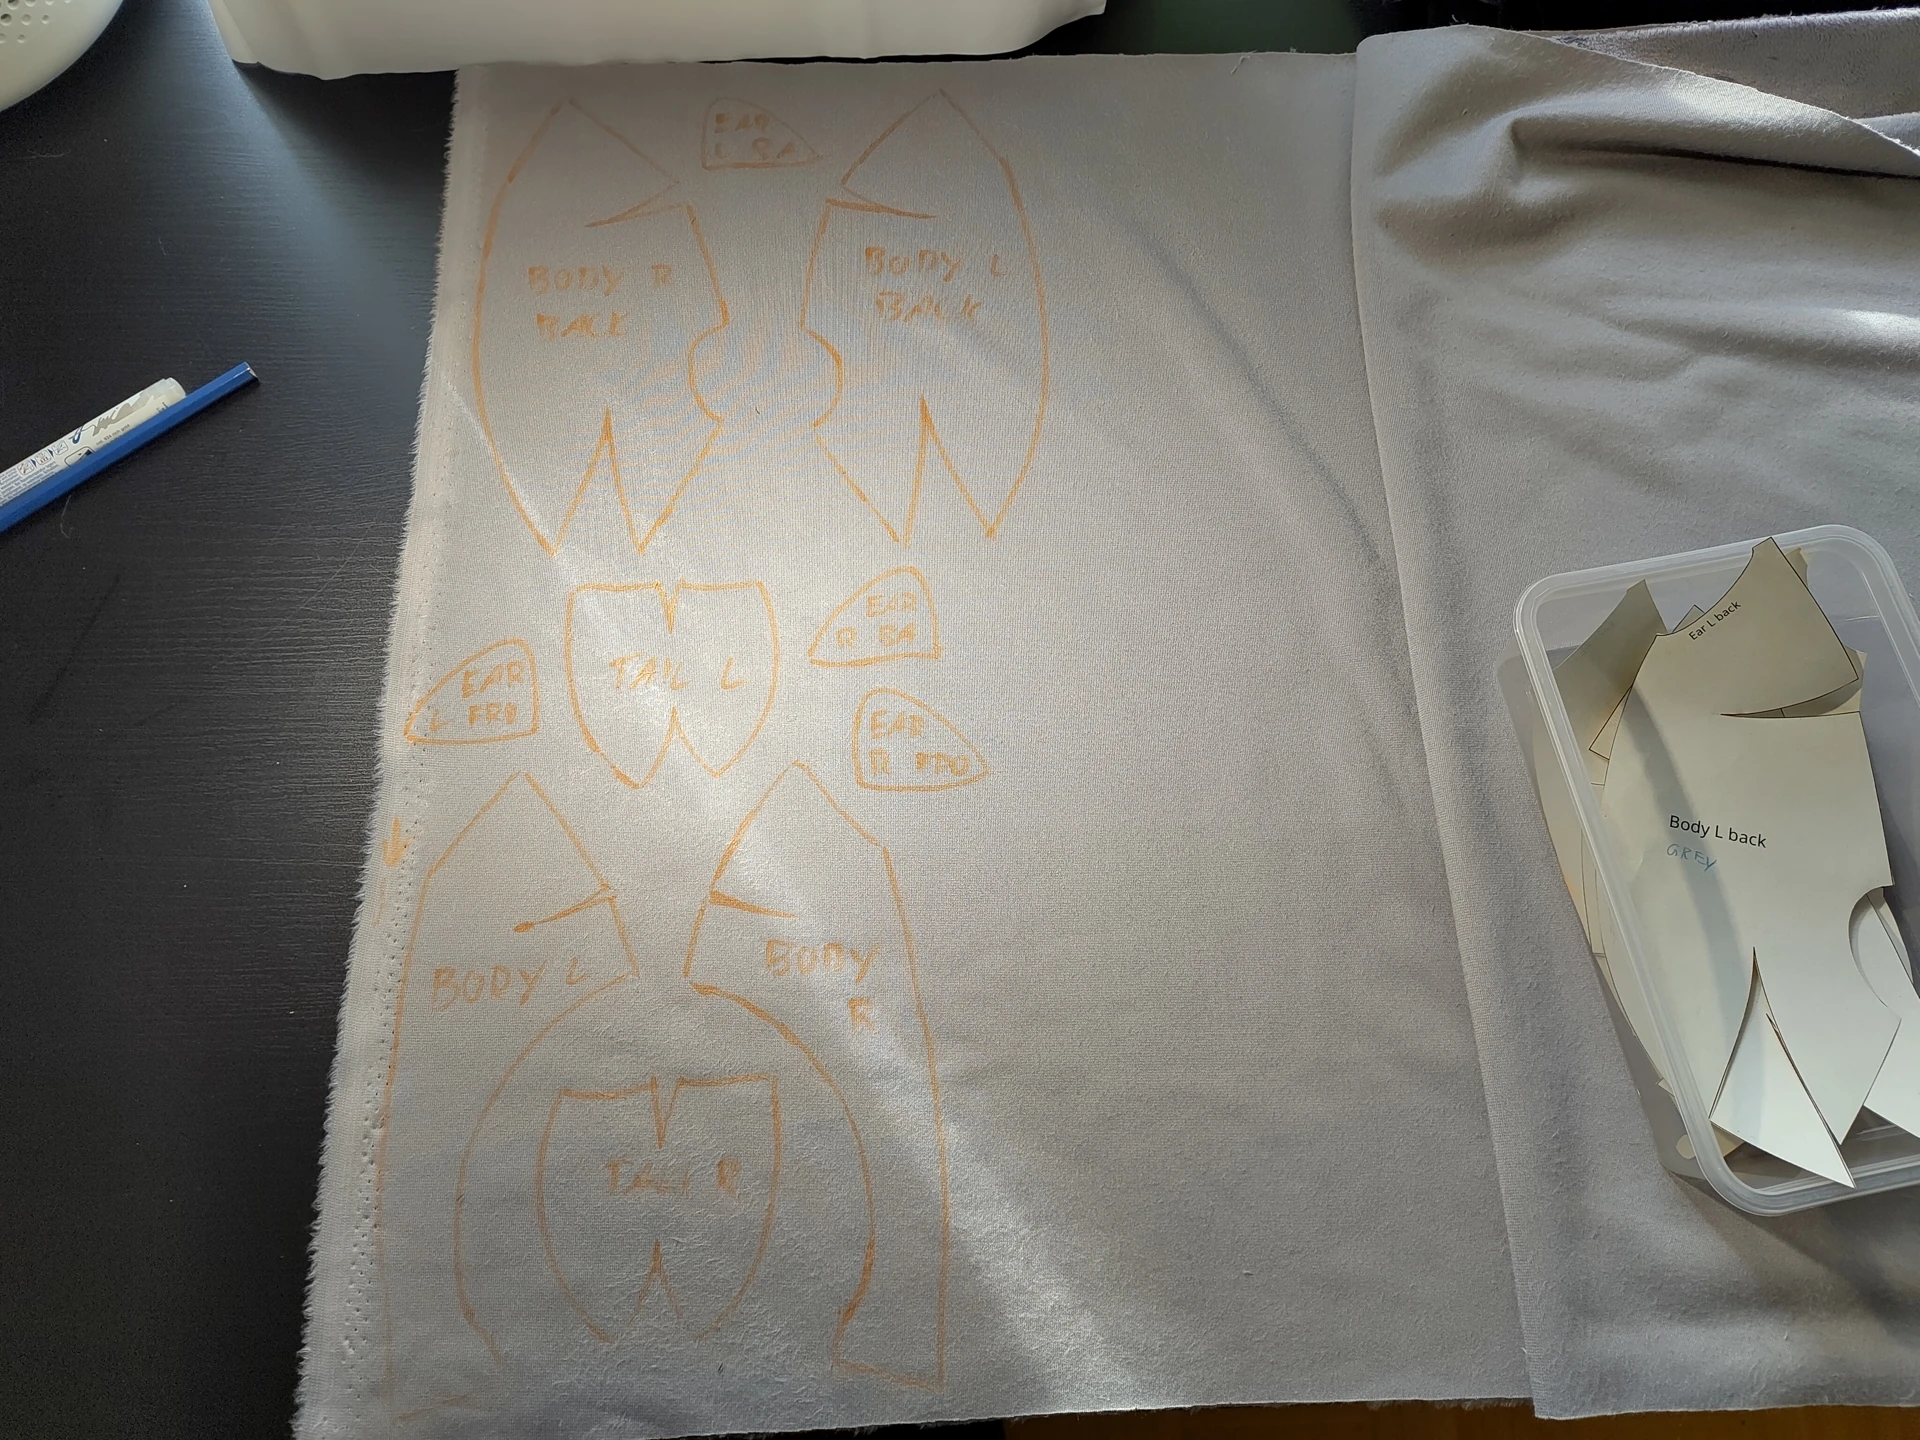 A sewing pattern drawn on the backside of a fabric.